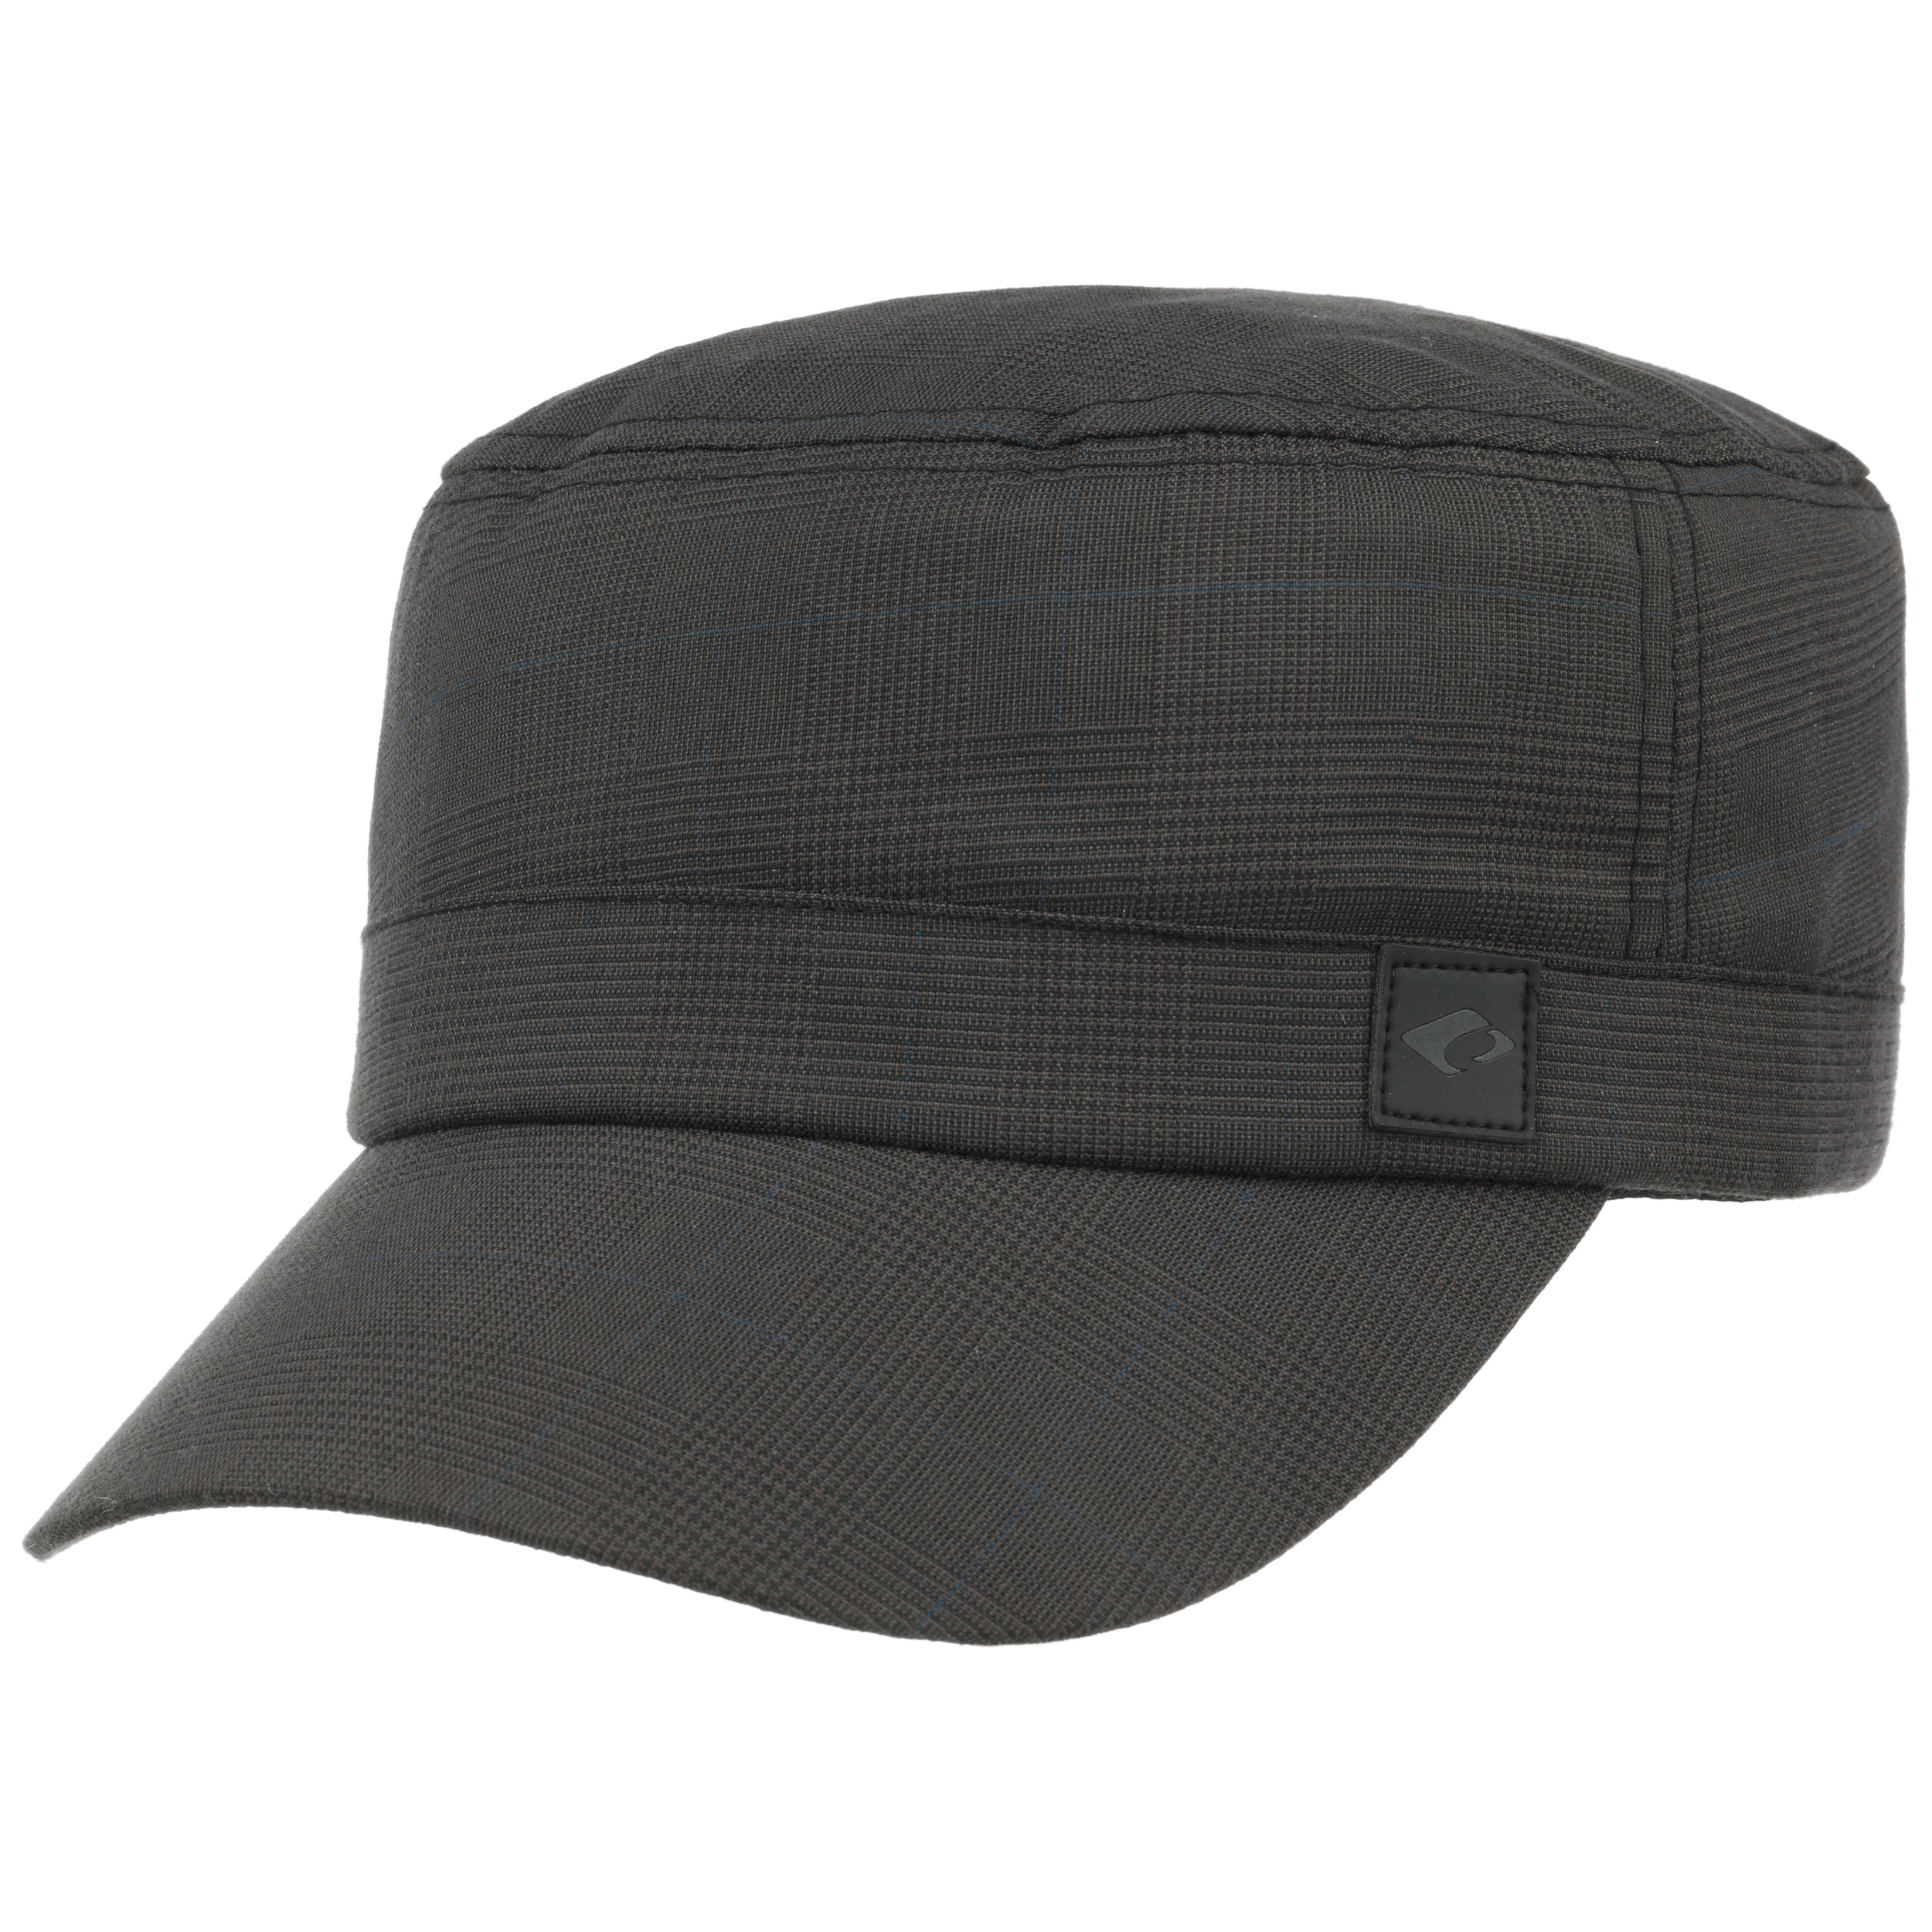 Sydney Army Cap by Chillouts - 17,95 £